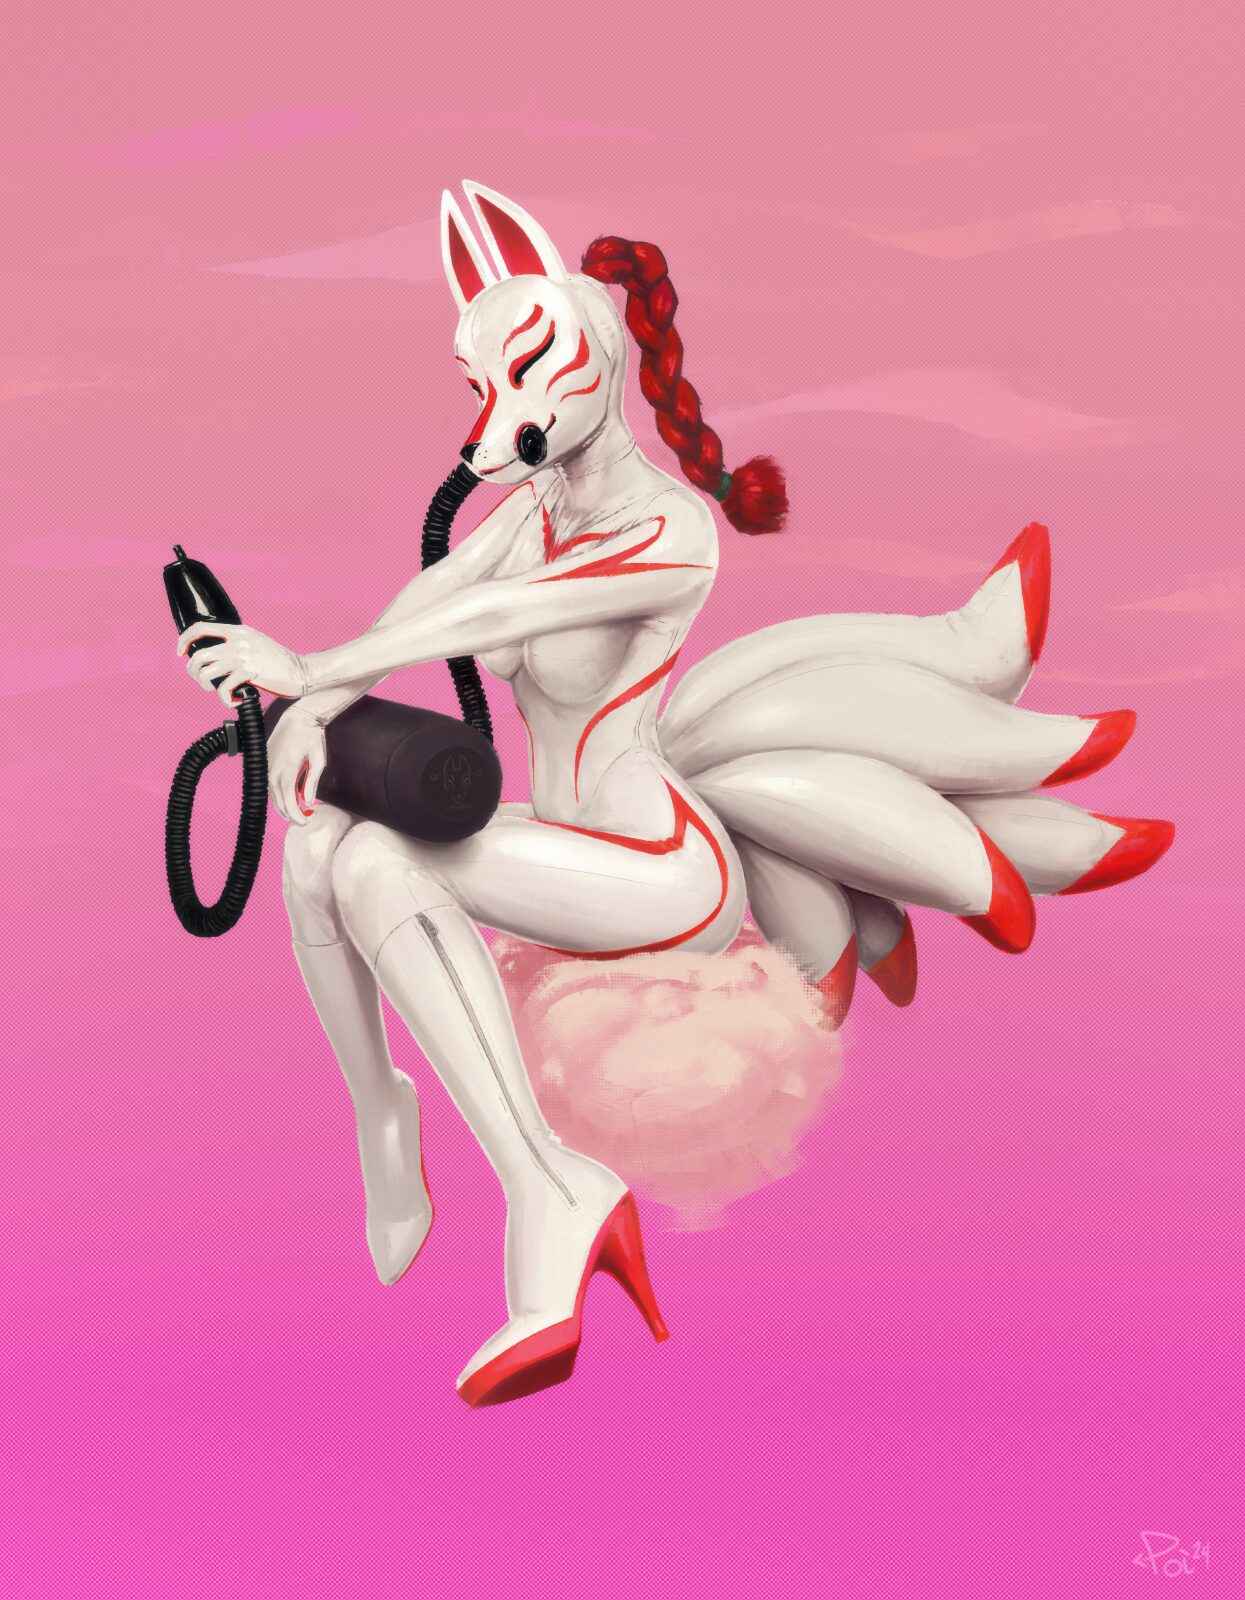 LayerIndustry's Kat is completely suited as a white latex kitsune with red markings. Their outfit includes matching white heels with a red platform, nine inflatable tails, and a kitsune mask gasmask (which is currently hooked up to a mysterious tank rested on their lap and split off to a rebreather bag). They're sitting atop a pink cloud over a pink-ish gradient background.